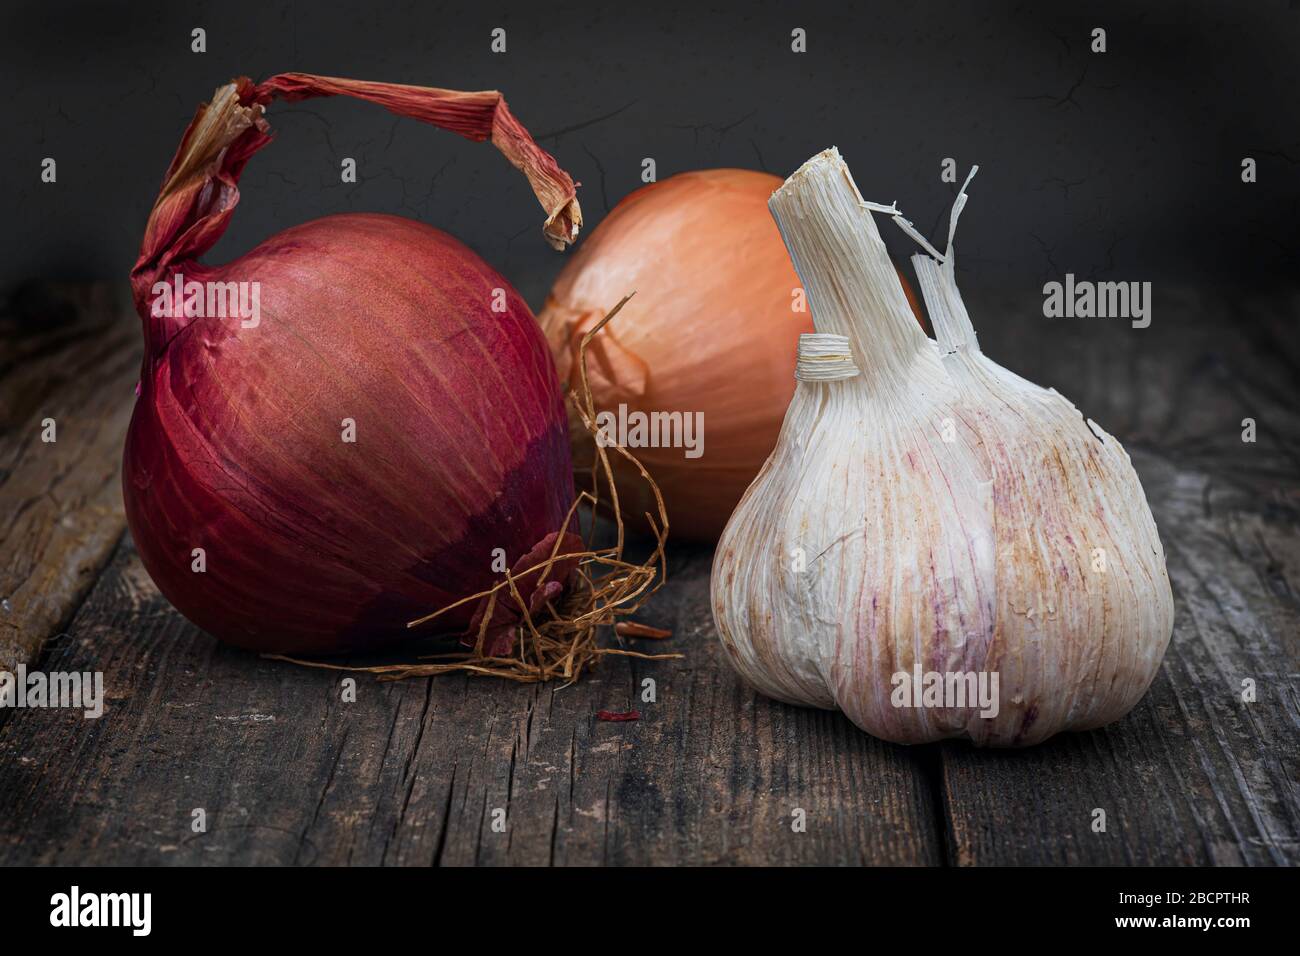 Two onions and a head of garlic on a wooden table close up. Food background Stock Photo